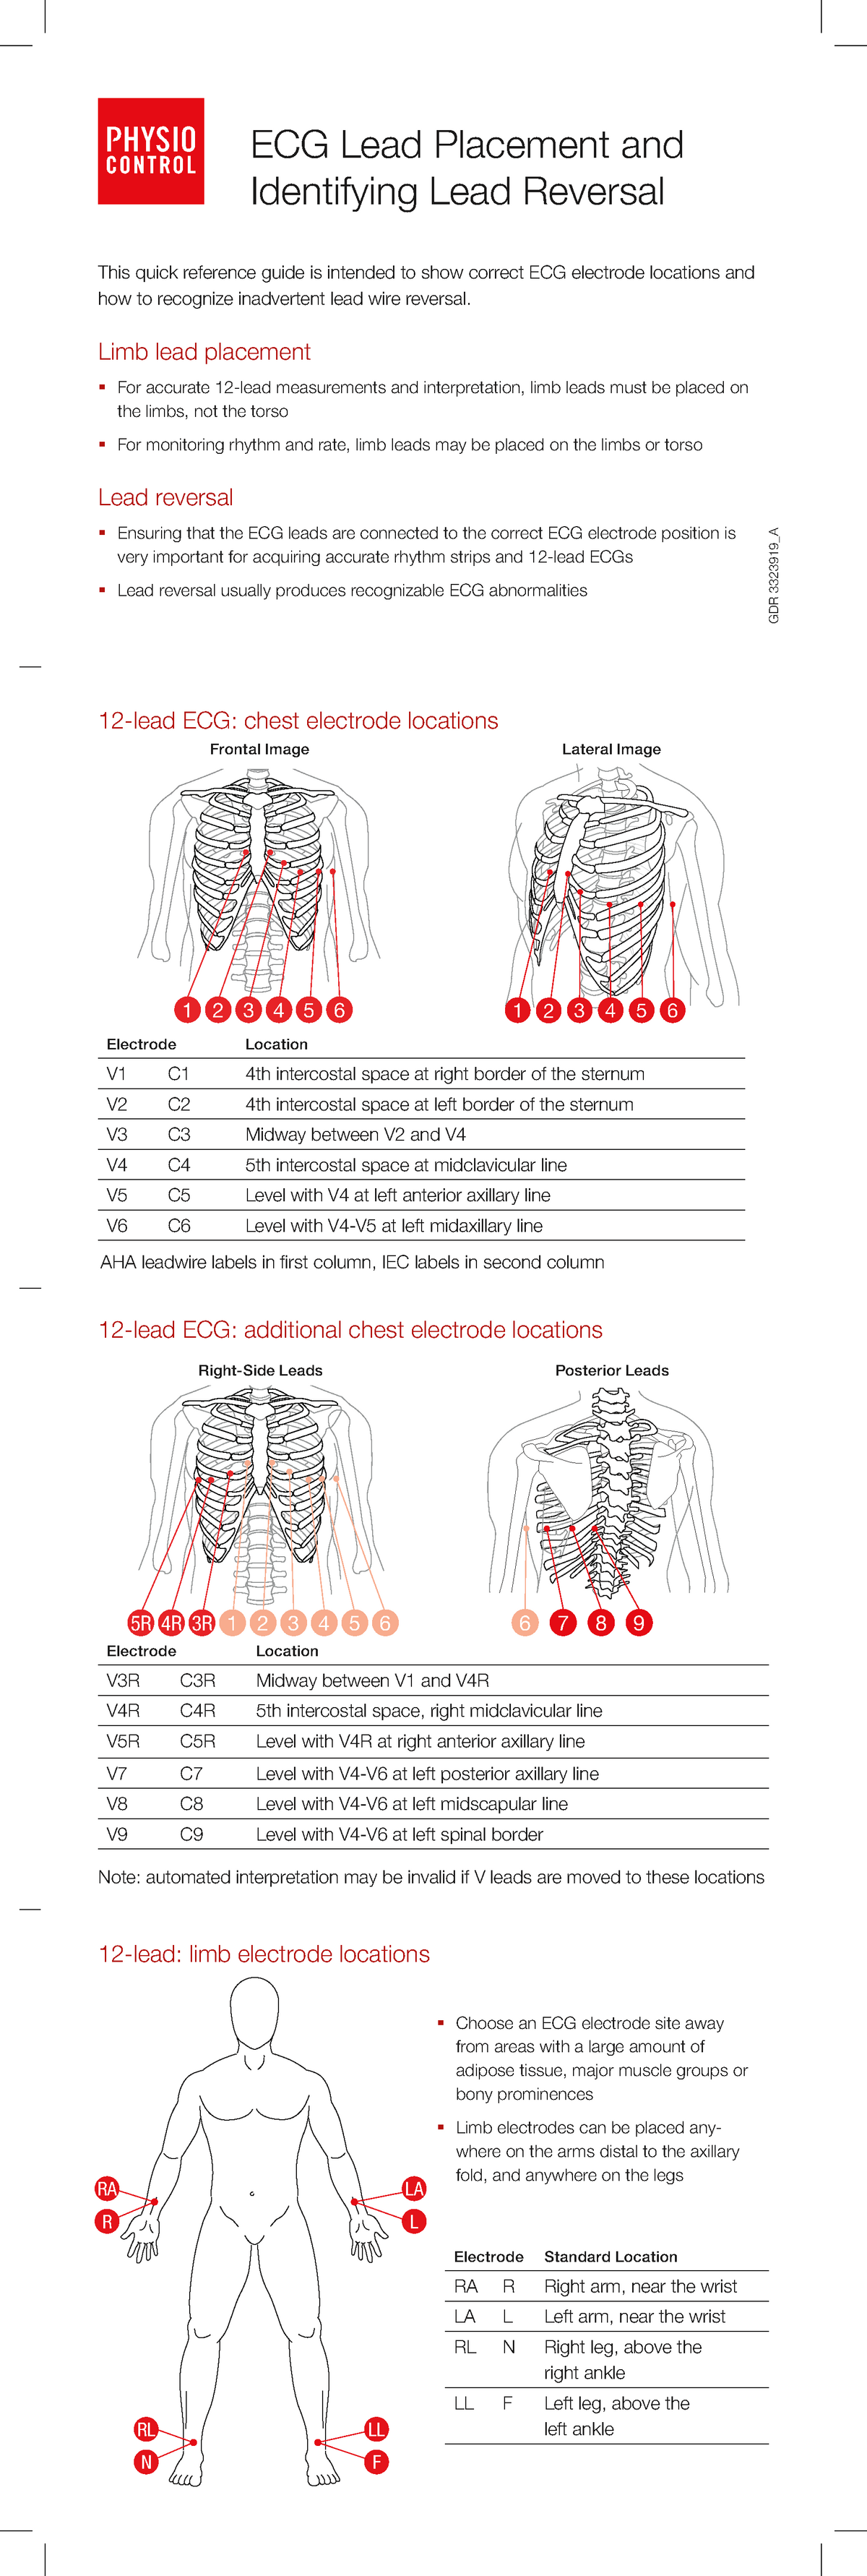 ECG Lead Placement and Lead Reversal Guide - ECG Lead Placement and ...